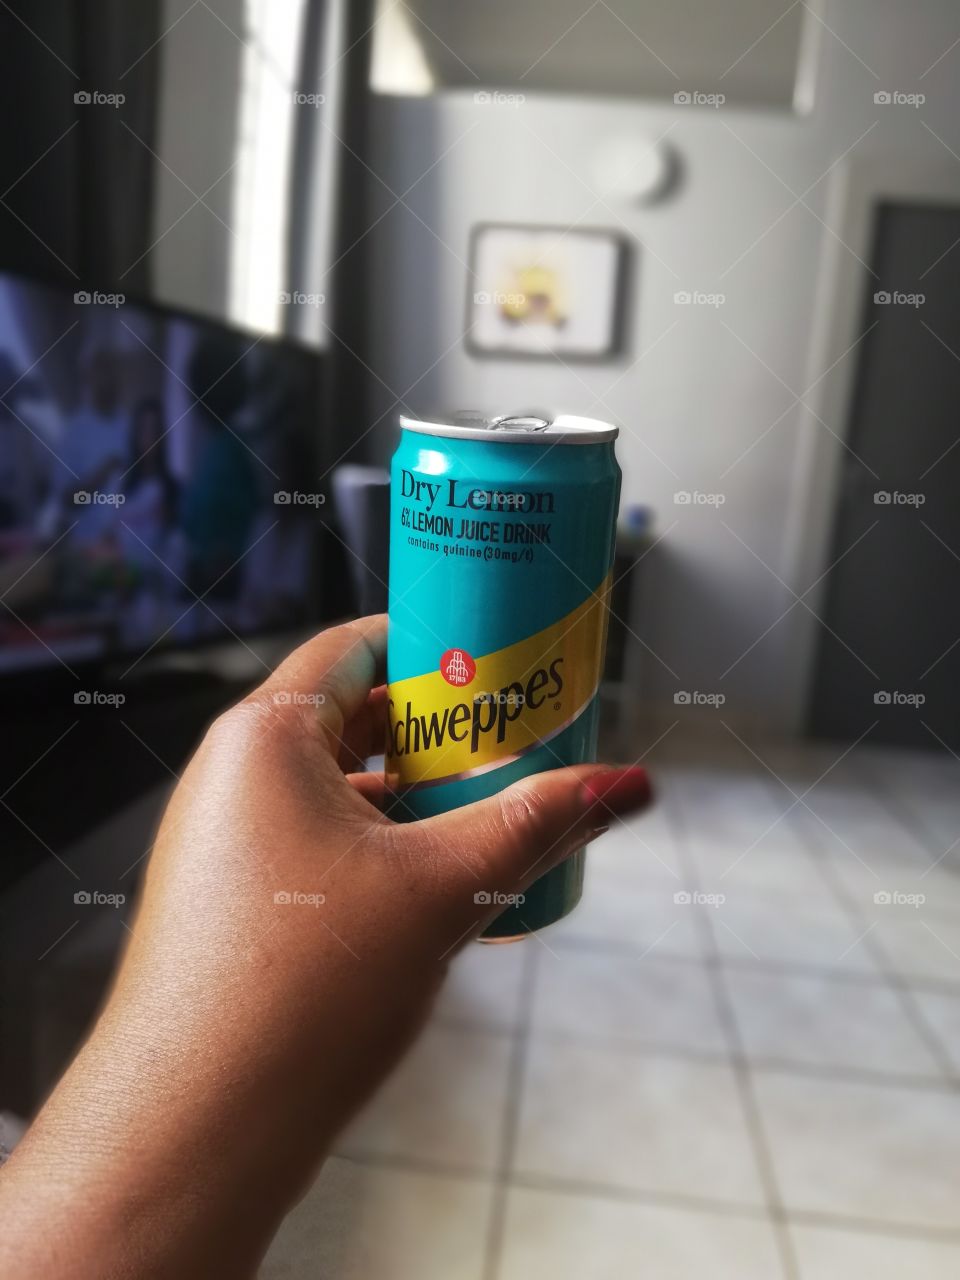 Cold Dry lemon can